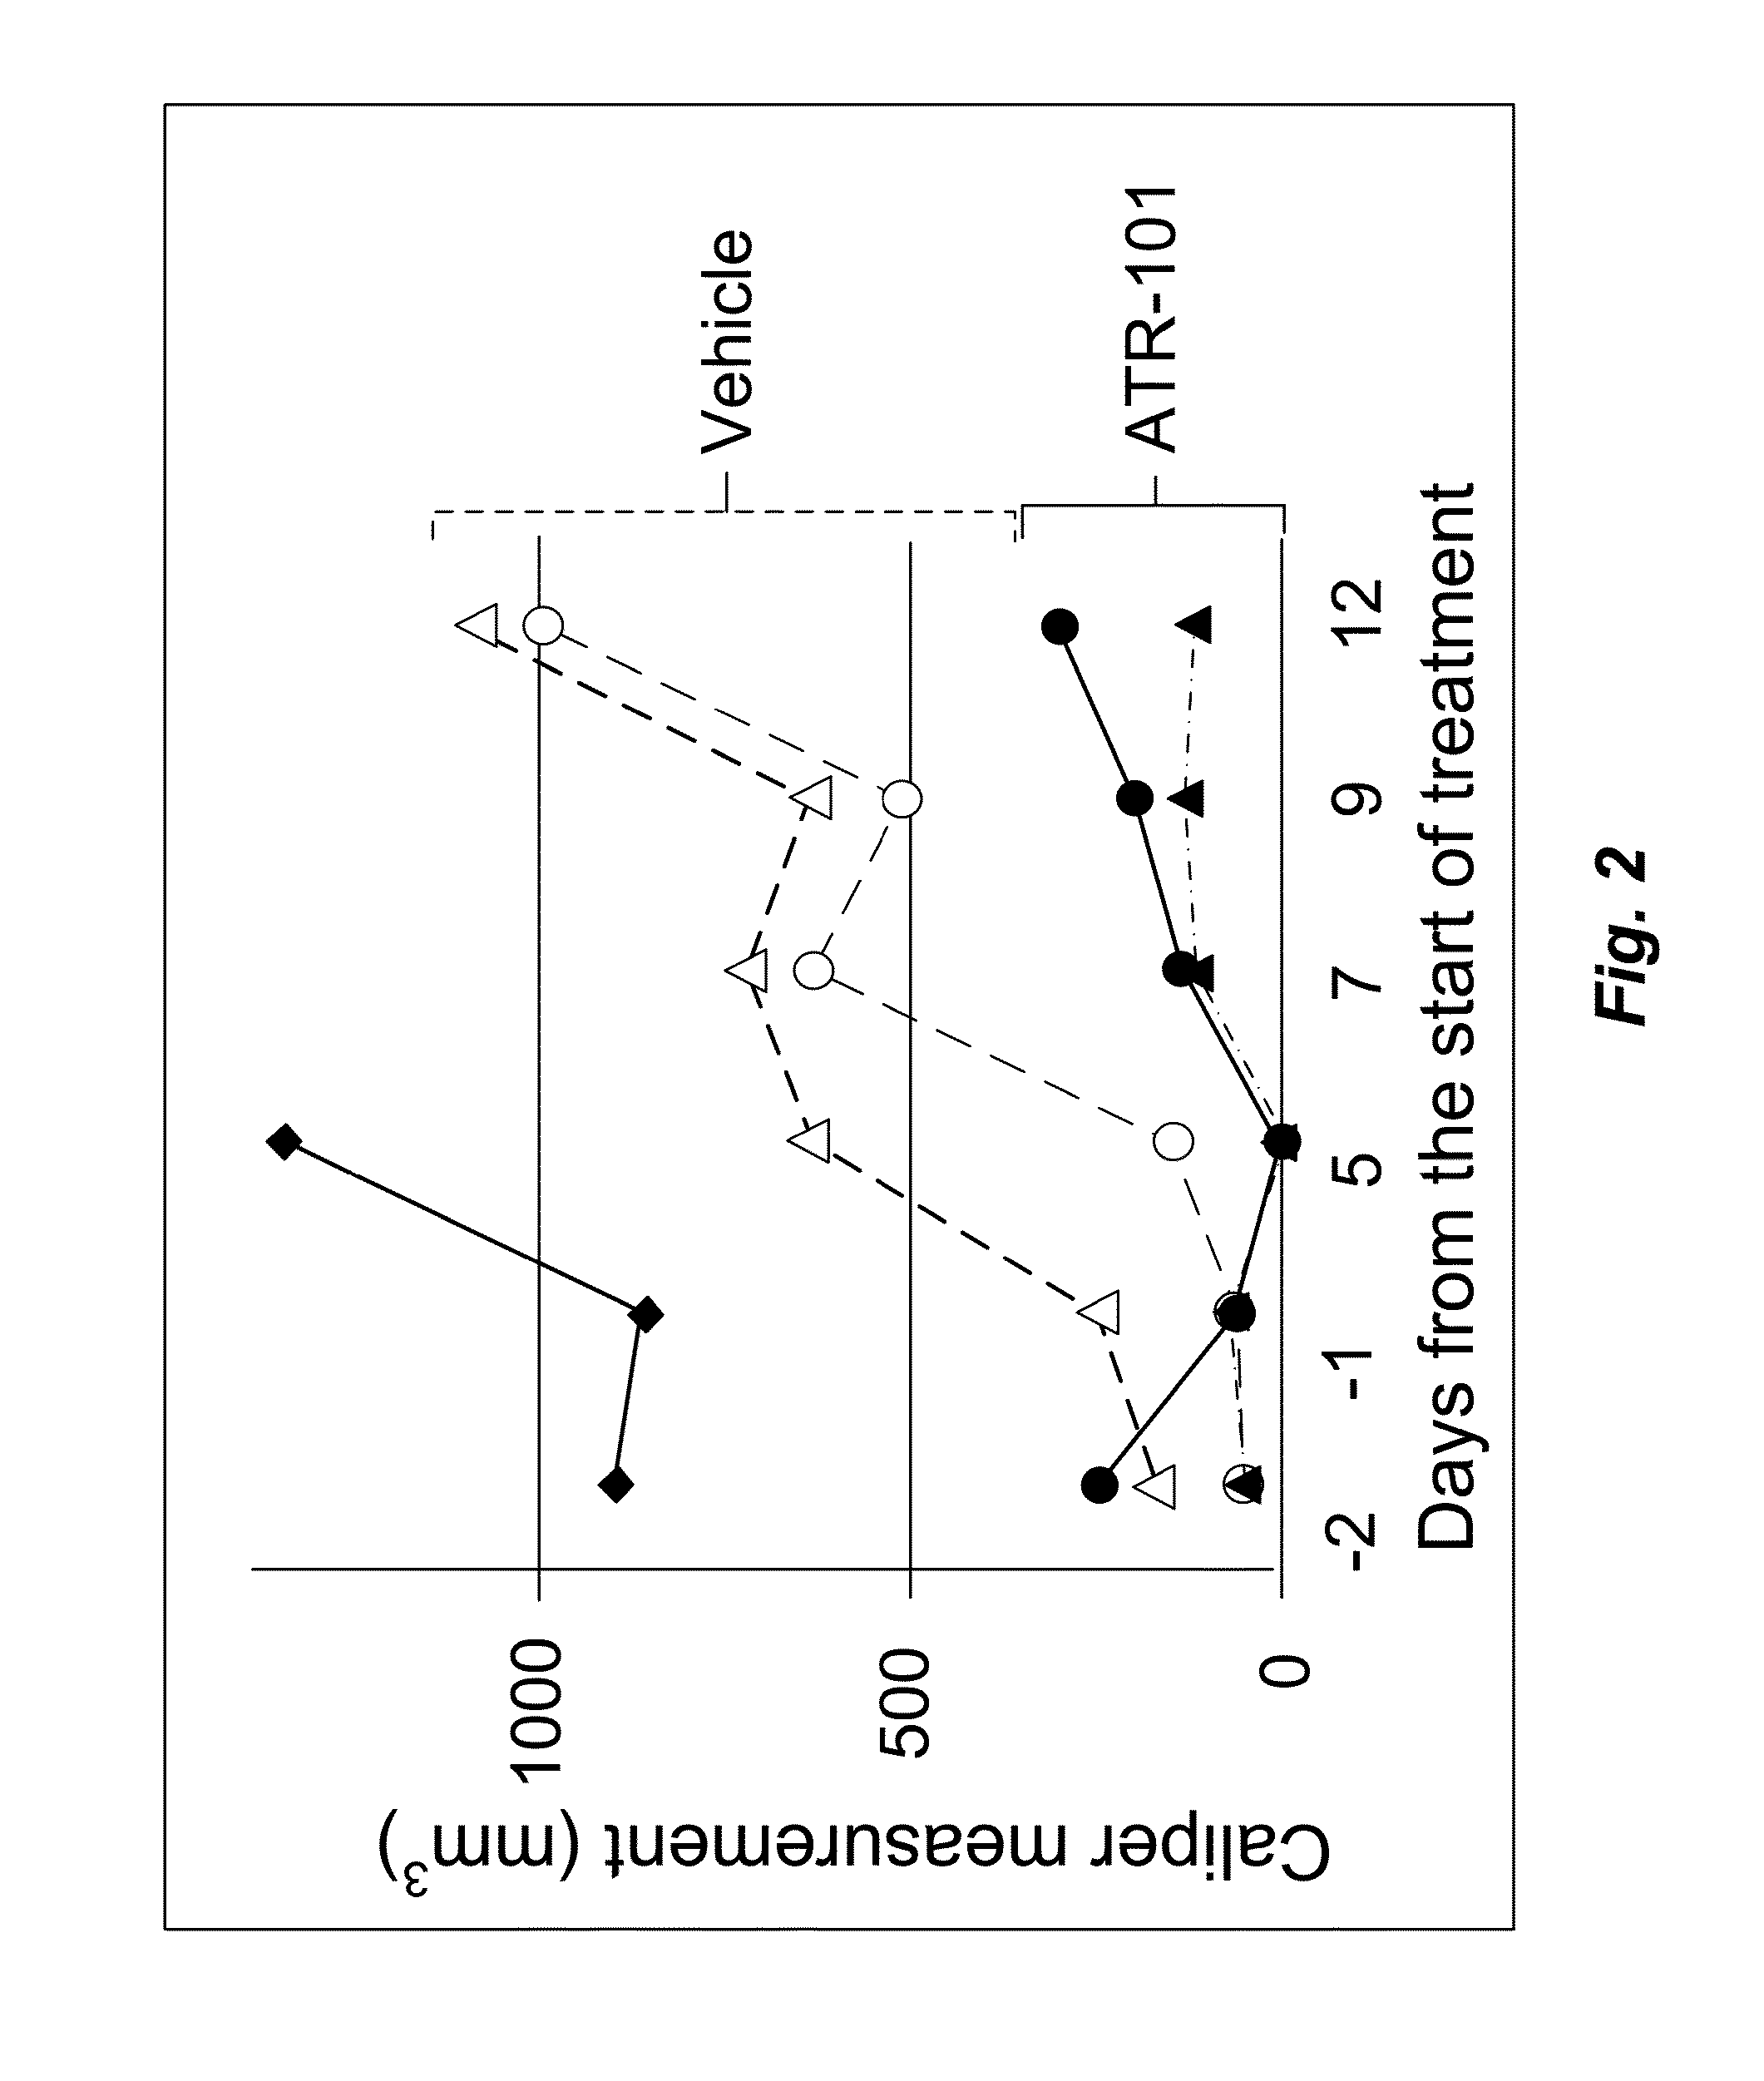 Compounds and Methods for Treating Aberrant Adrenocartical Cell Disorders